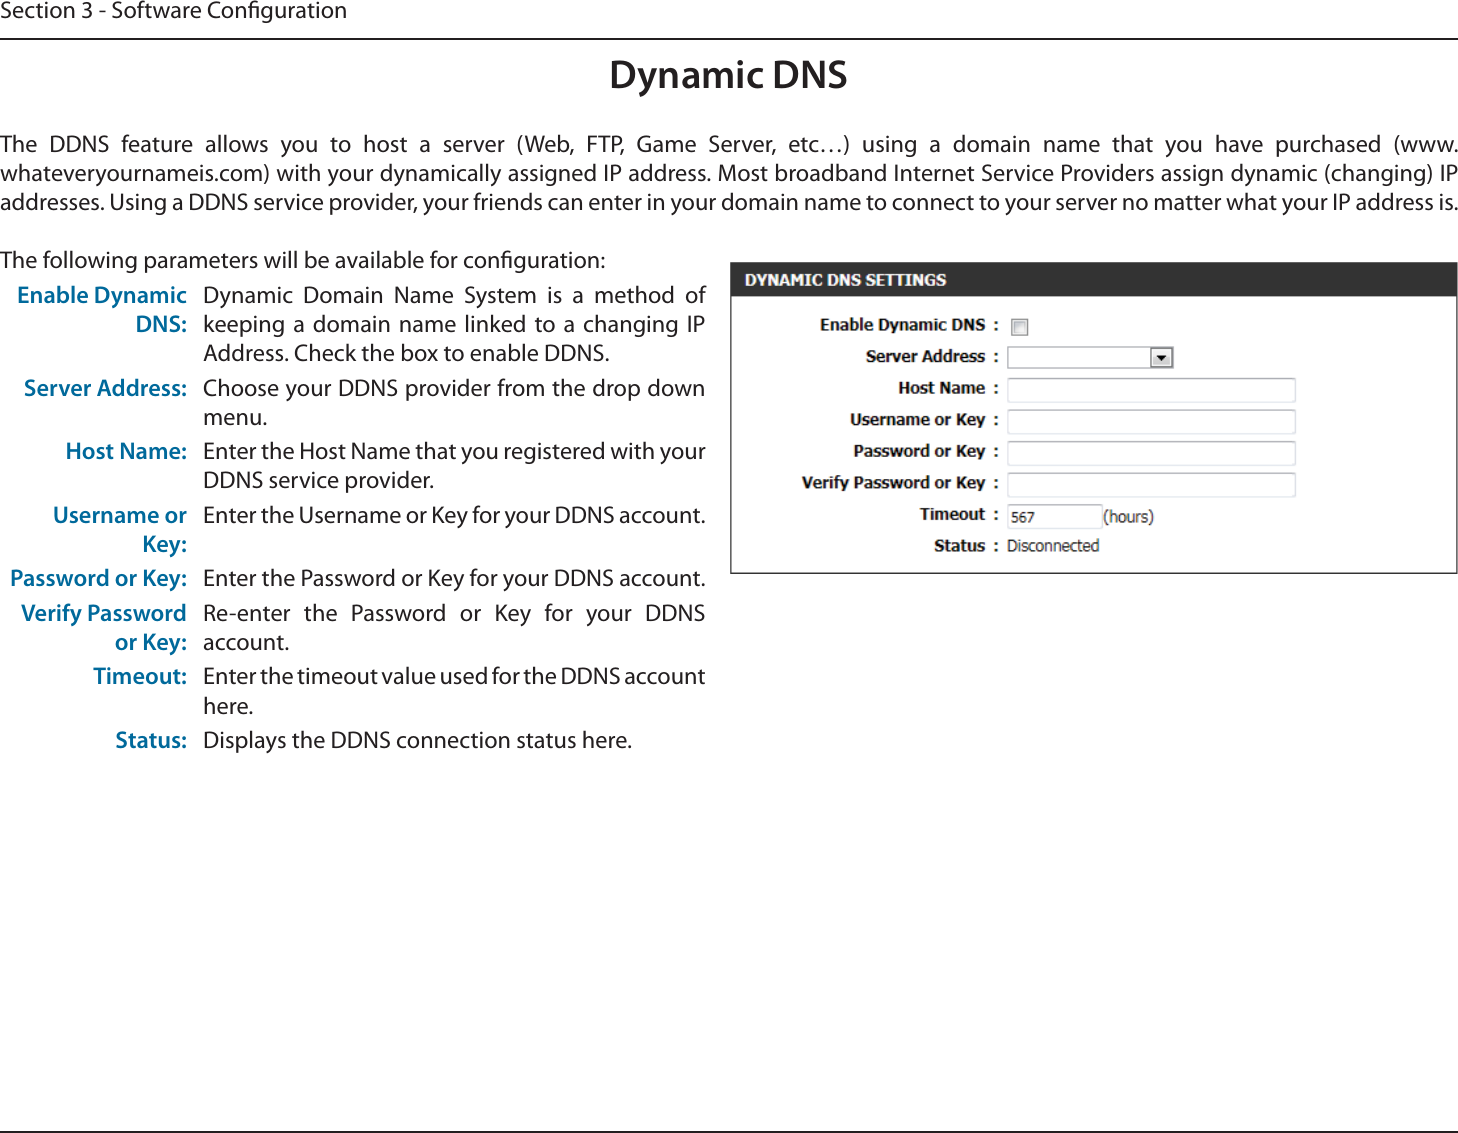 Section 3 - Software CongurationDynamic DNSThe DDNS feature allows you to host a server (Web, FTP, Game Server, etc…) using a domain name that you have purchased (www.whateveryournameis.com) with your dynamically assigned IP address. Most broadband Internet Service Providers assign dynamic (changing) IP addresses. Using a DDNS service provider, your friends can enter in your domain name to connect to your server no matter what your IP address is.The following parameters will be available for conguration:Enable Dynamic DNS:Dynamic Domain Name System is a method of keeping a domain name linked to a changing IP Address. Check the box to enable DDNS.Server Address: Choose your DDNS provider from the drop down menu.Host Name: Enter the Host Name that you registered with your DDNS service provider.Username or Key:Enter the Username or Key for your DDNS account.Password or Key: Enter the Password or Key for your DDNS account.Verify Password or Key:Re-enter the Password or Key for your DDNS account.Timeout: Enter the timeout value used for the DDNS account here.Status: Displays the DDNS connection status here.